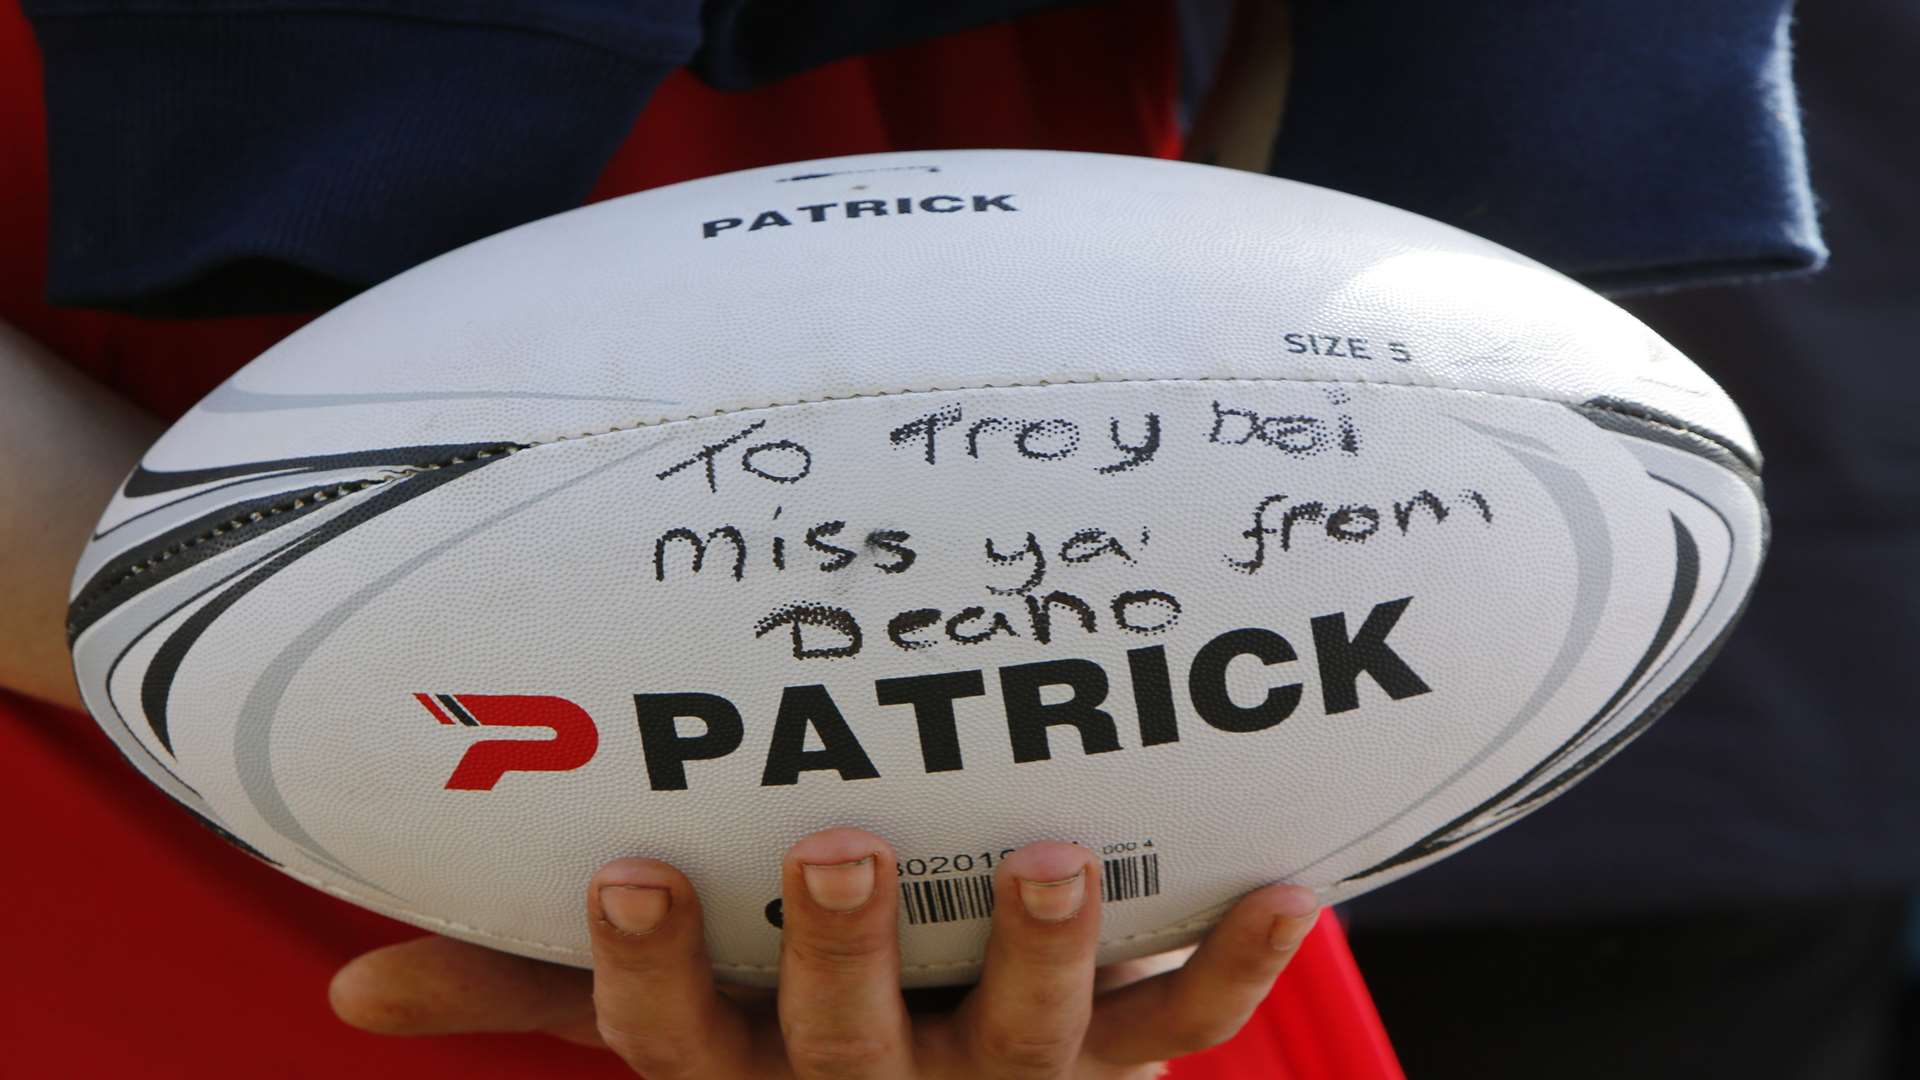 A friend leaves a tribute to Troy on a rugby ball